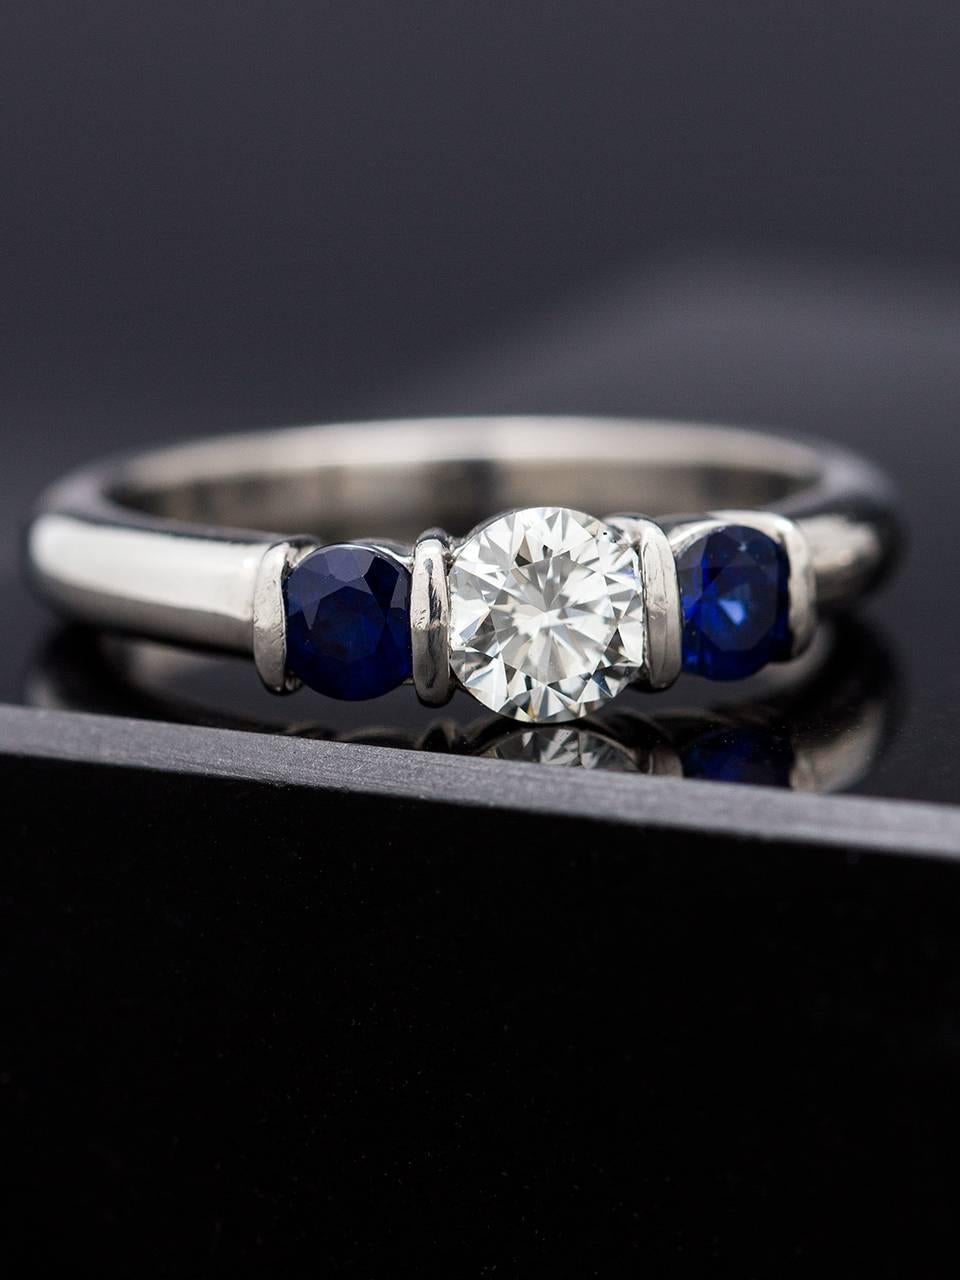 Simple, understated and versatile platinum three stone ring manufactured by Kwiat. The 5mm center round brilliant cut diamond weighs approximately 0.50ct, G/VS2, and is flanked by two bar set 3.5mm rich blue round sapphire side stones. Makes a